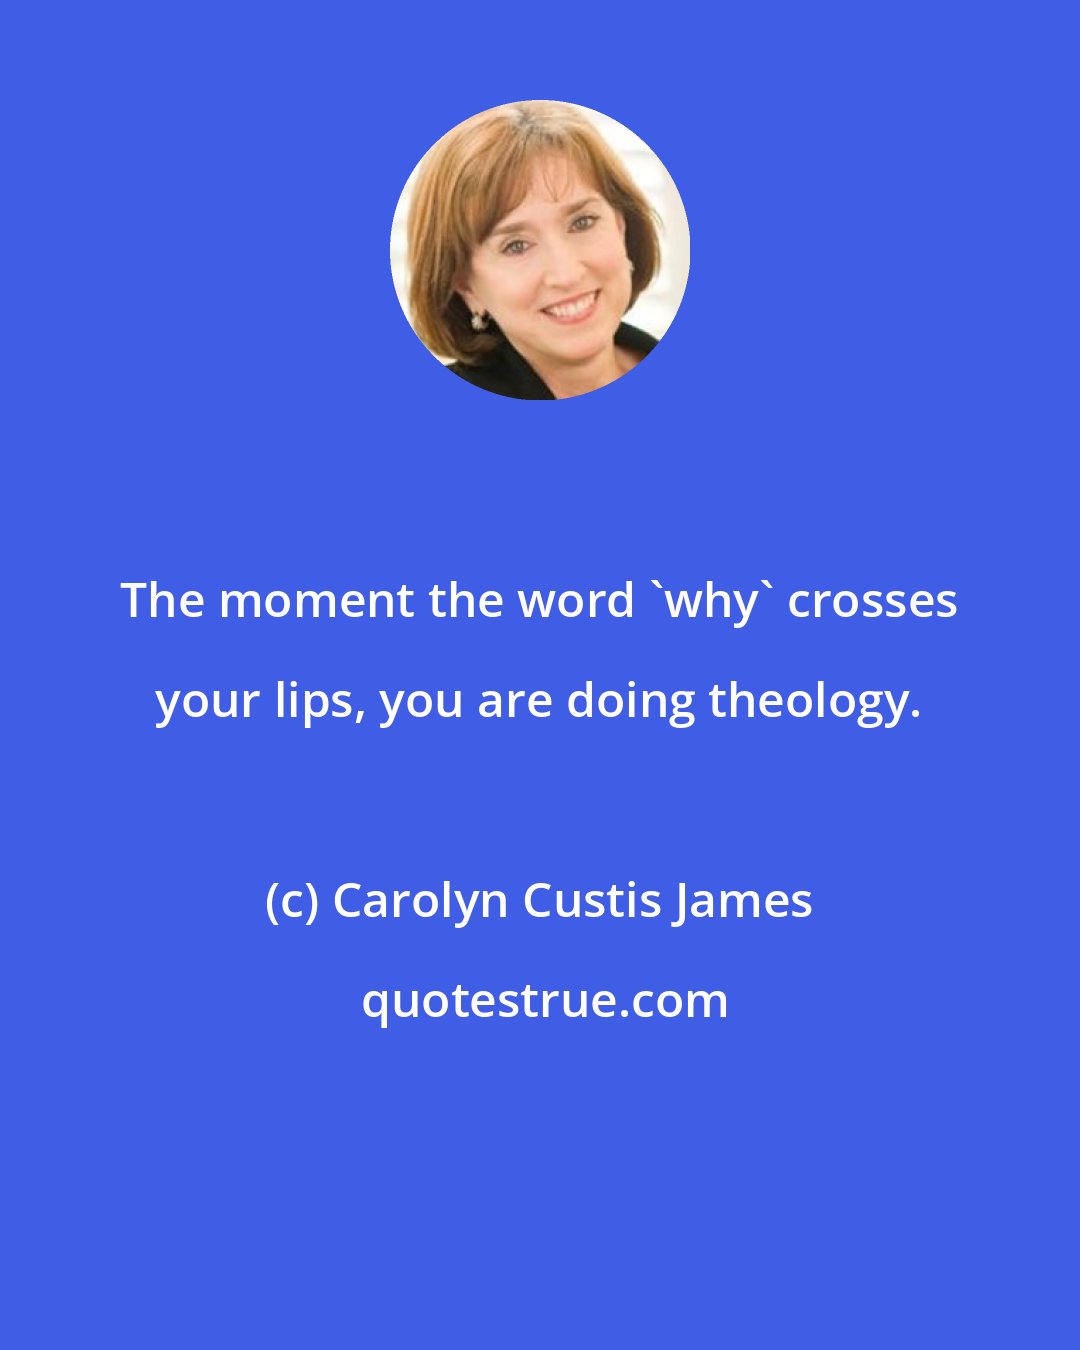 Carolyn Custis James: The moment the word 'why' crosses your lips, you are doing theology.